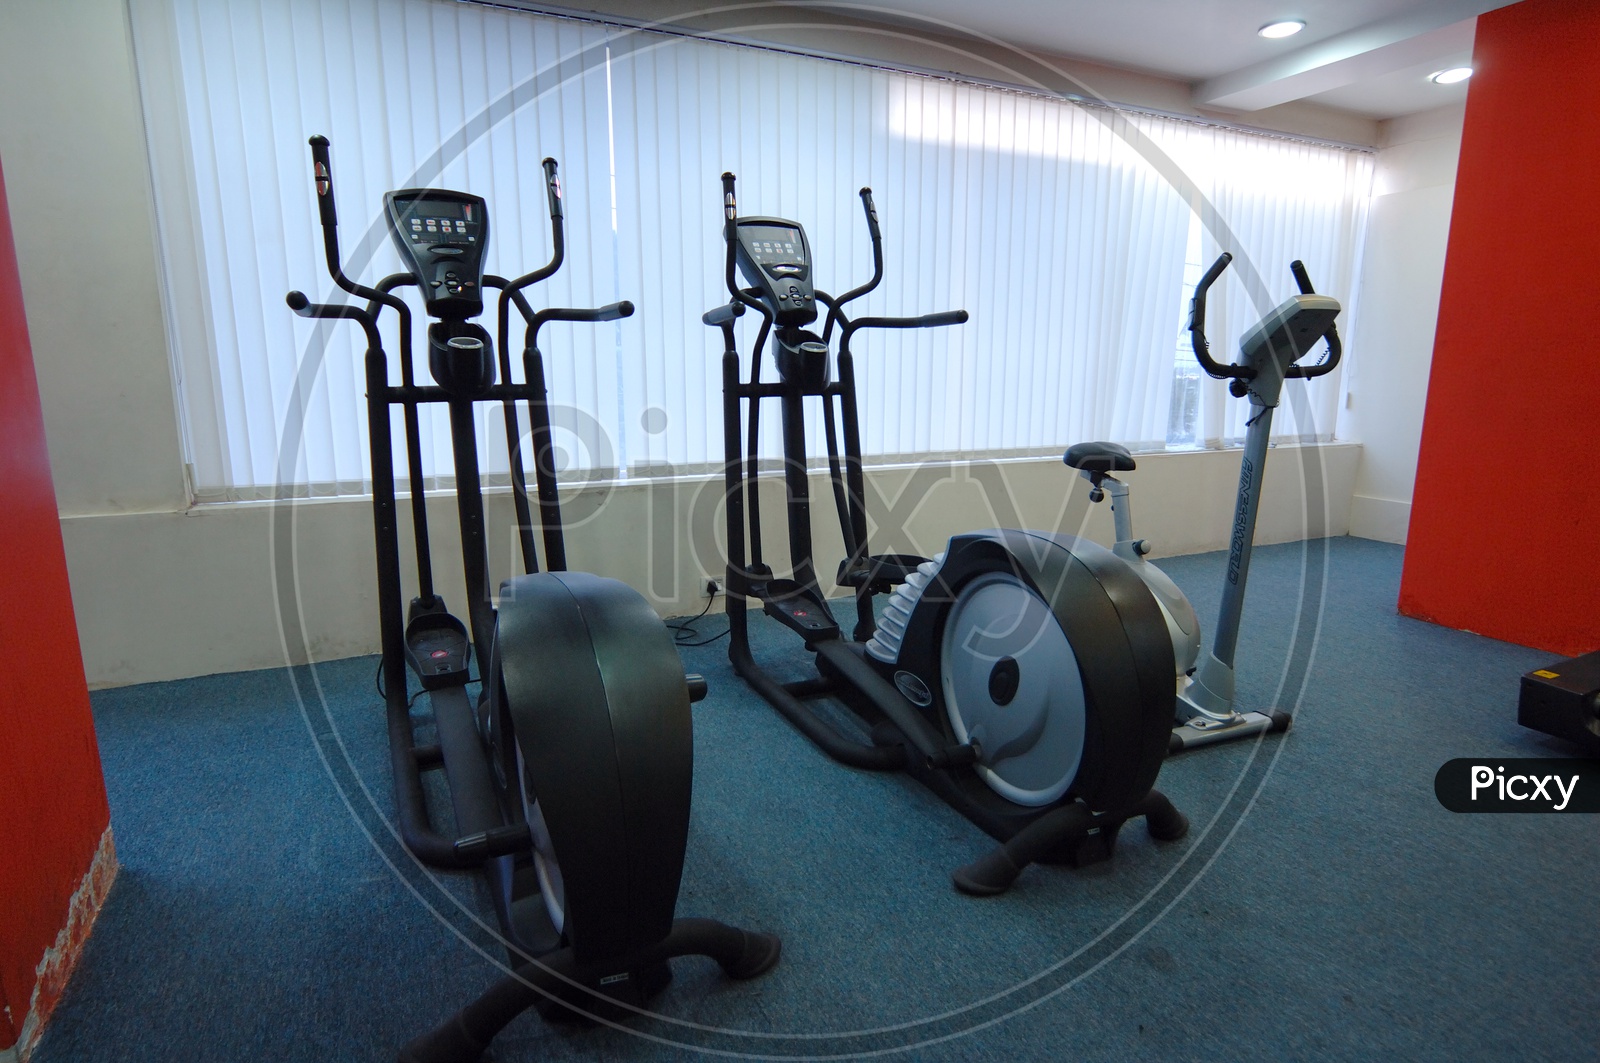 Exercise cycle in the gym - Gym equipment